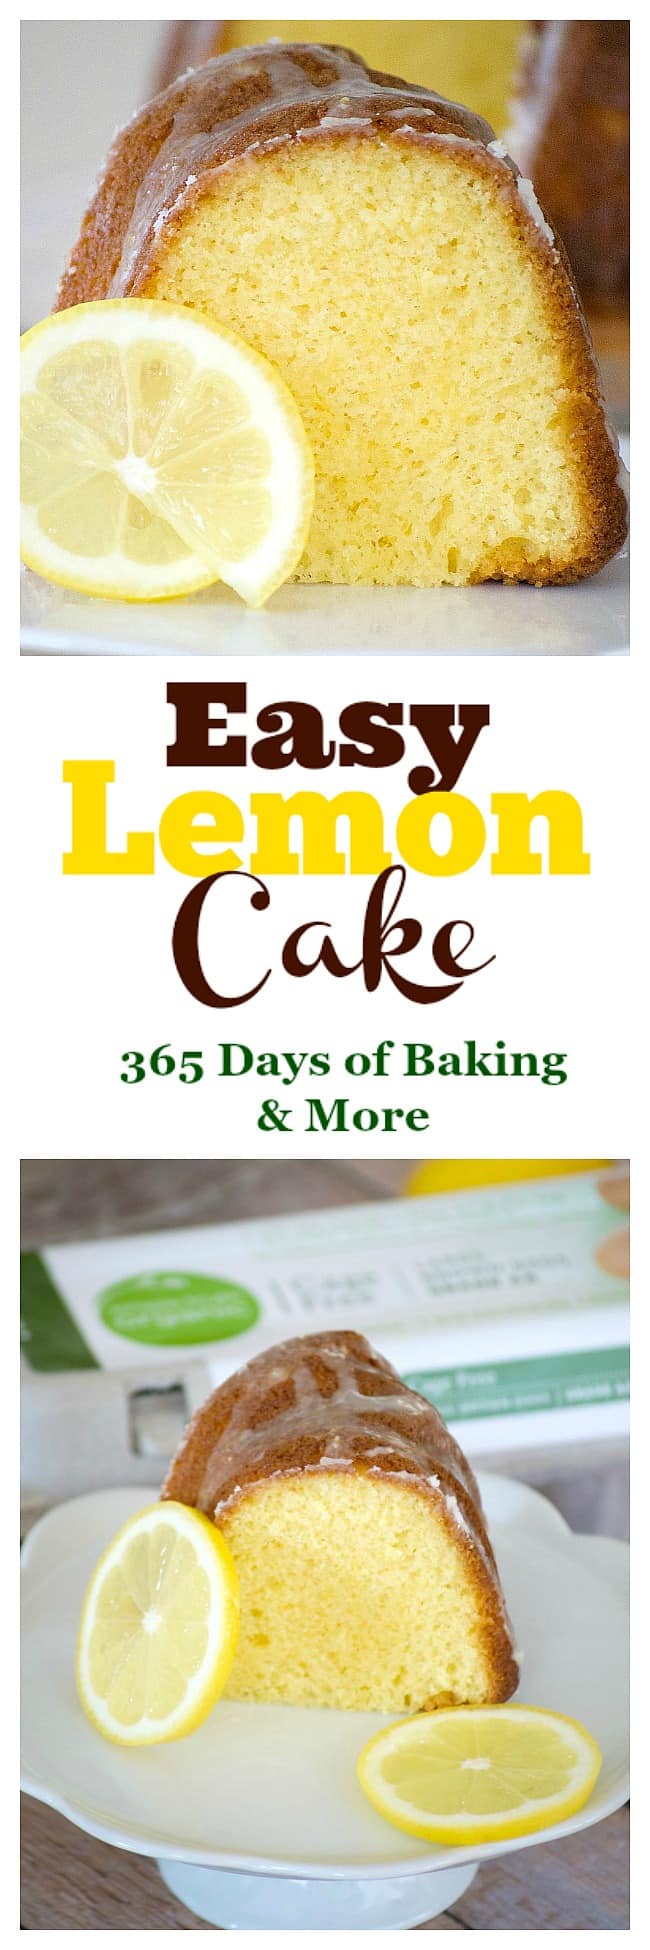 This easy lemon cake is made with a cake mix, lemon gelatin, and Kroger Simple Truth Eggs. A special dessert is served on Easter, Mother